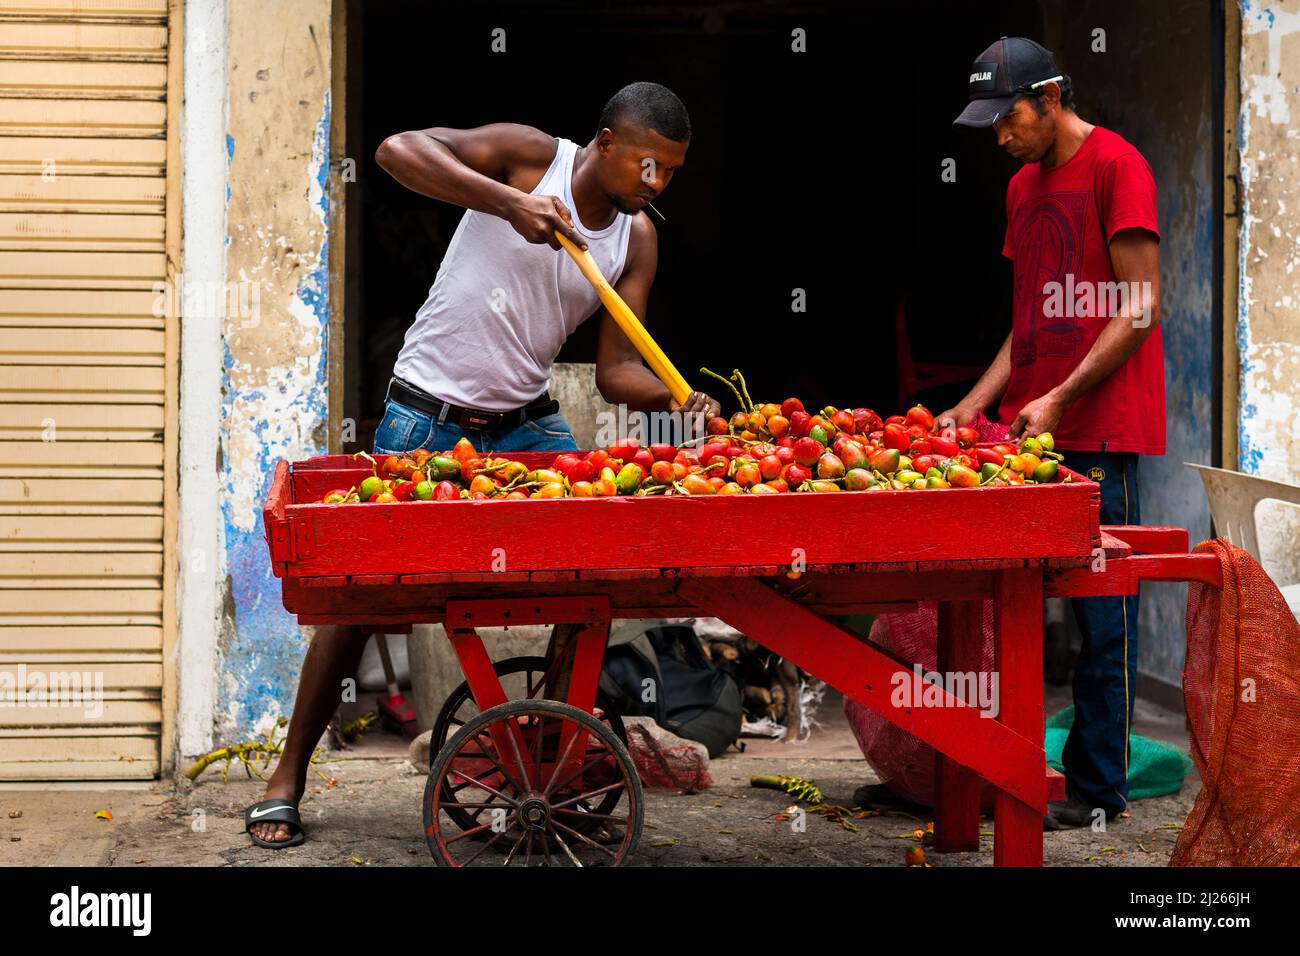 An Afro-Colombian man sells raw chontaduro (peach palm) fruits on the street in Cali, Valle del Cauca, Colombia. Stock Photo